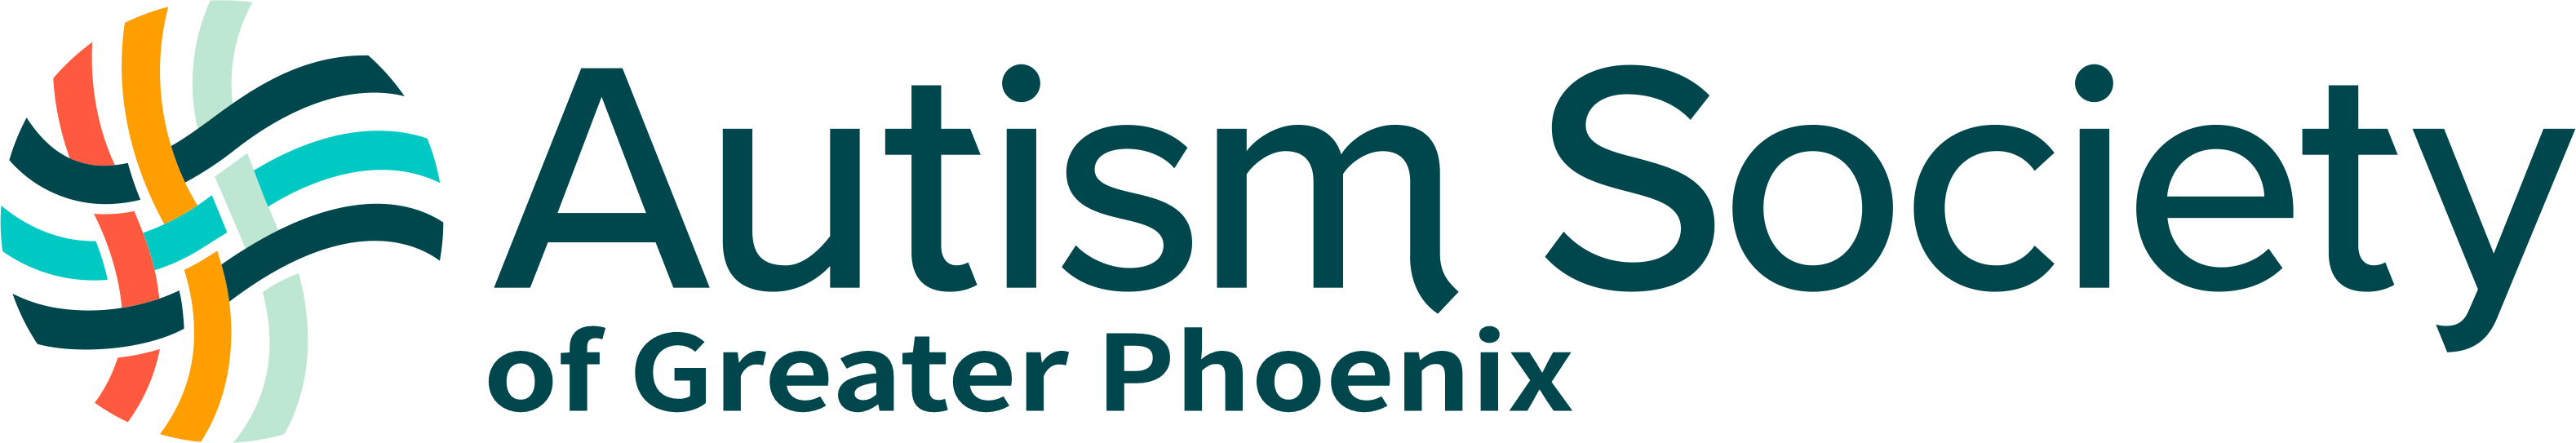 Autism Society of Greater Phoenix-New Logo.png